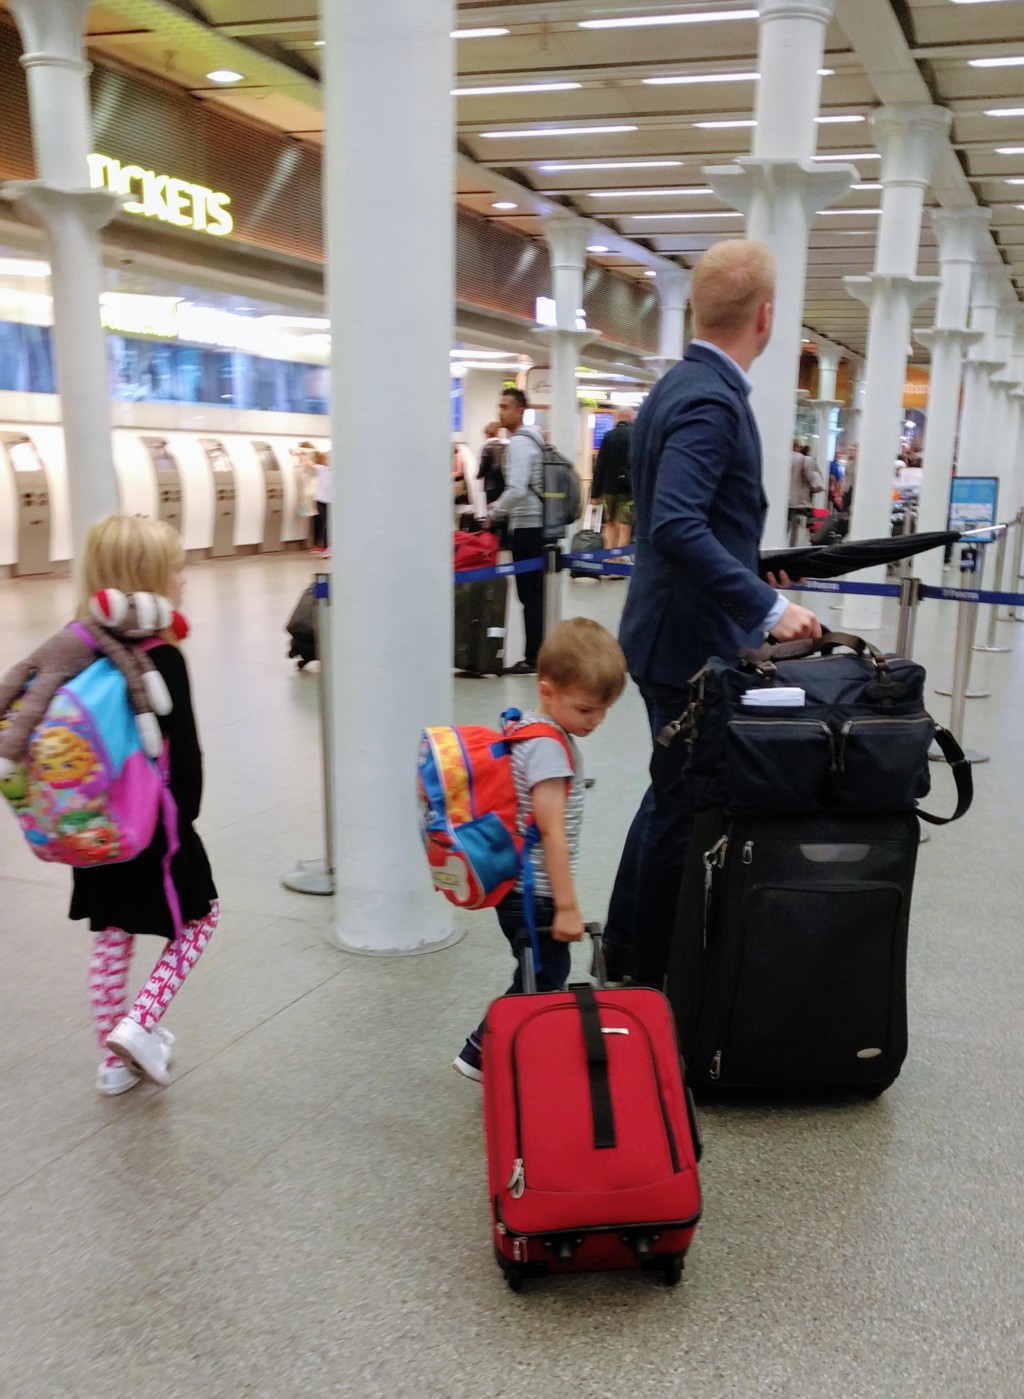 10 Tips for Surviving International Travel with Kids